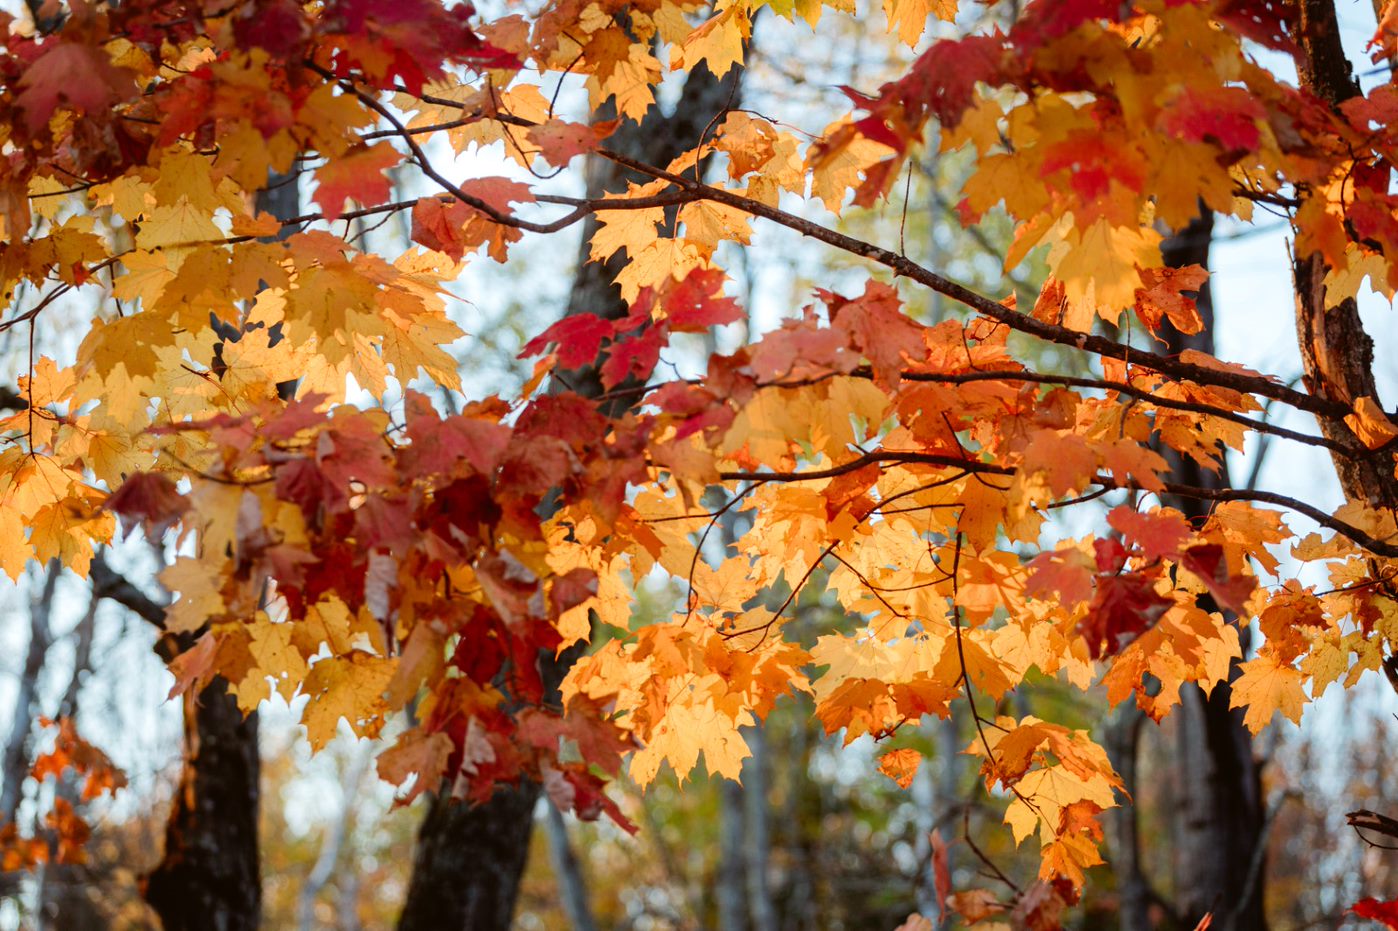 The distinctive leaves of the maple tree in autumn.